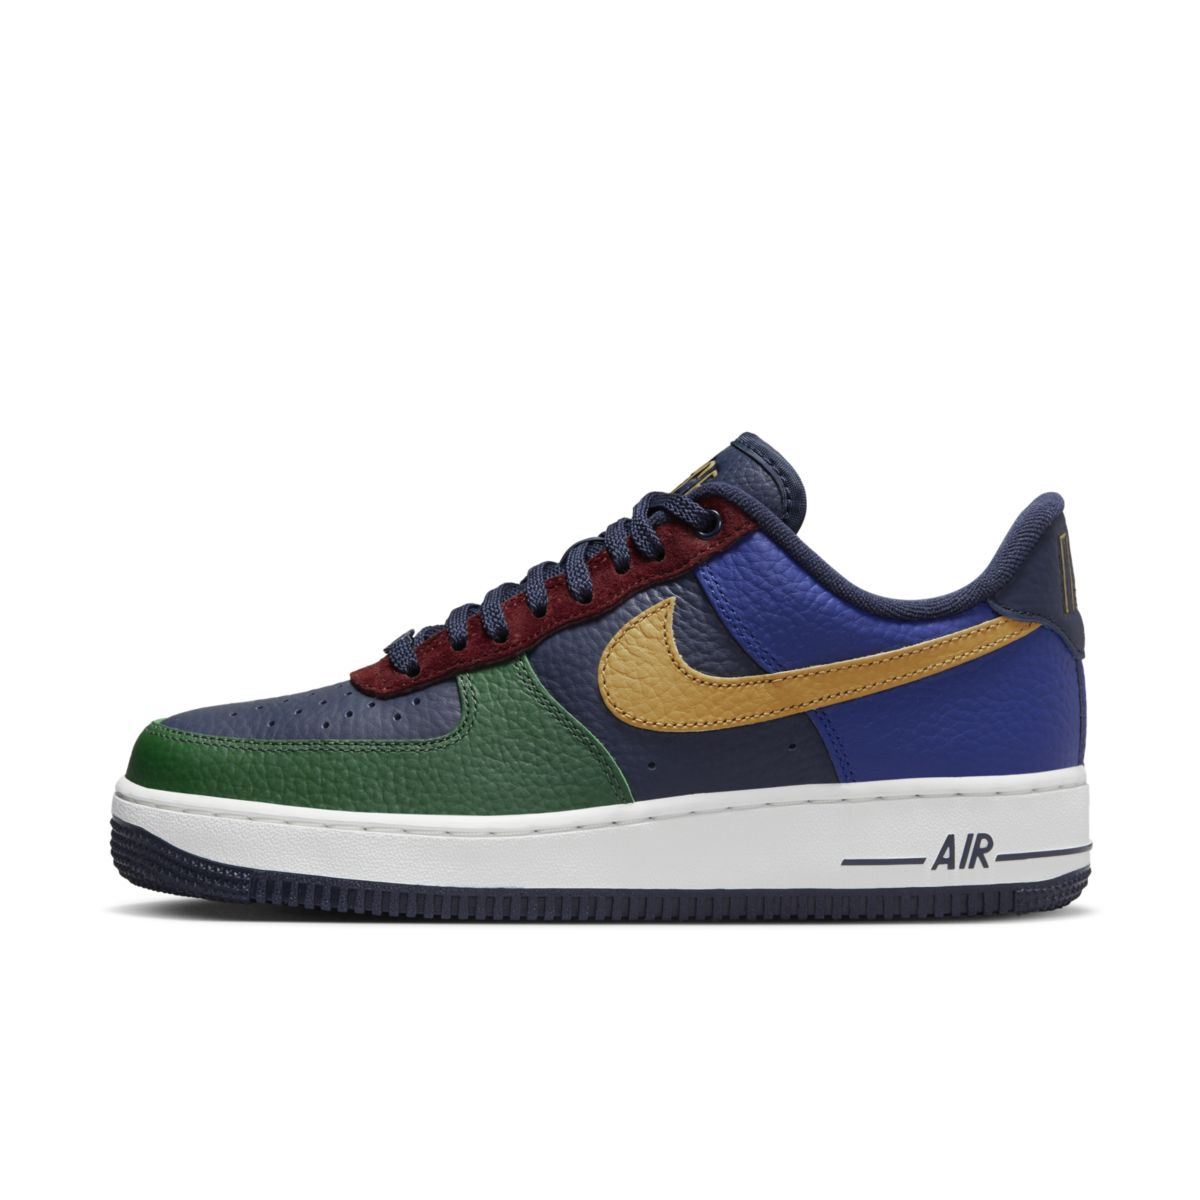 Nike Air Force 1 Low Gorge Green DR0148-300 2